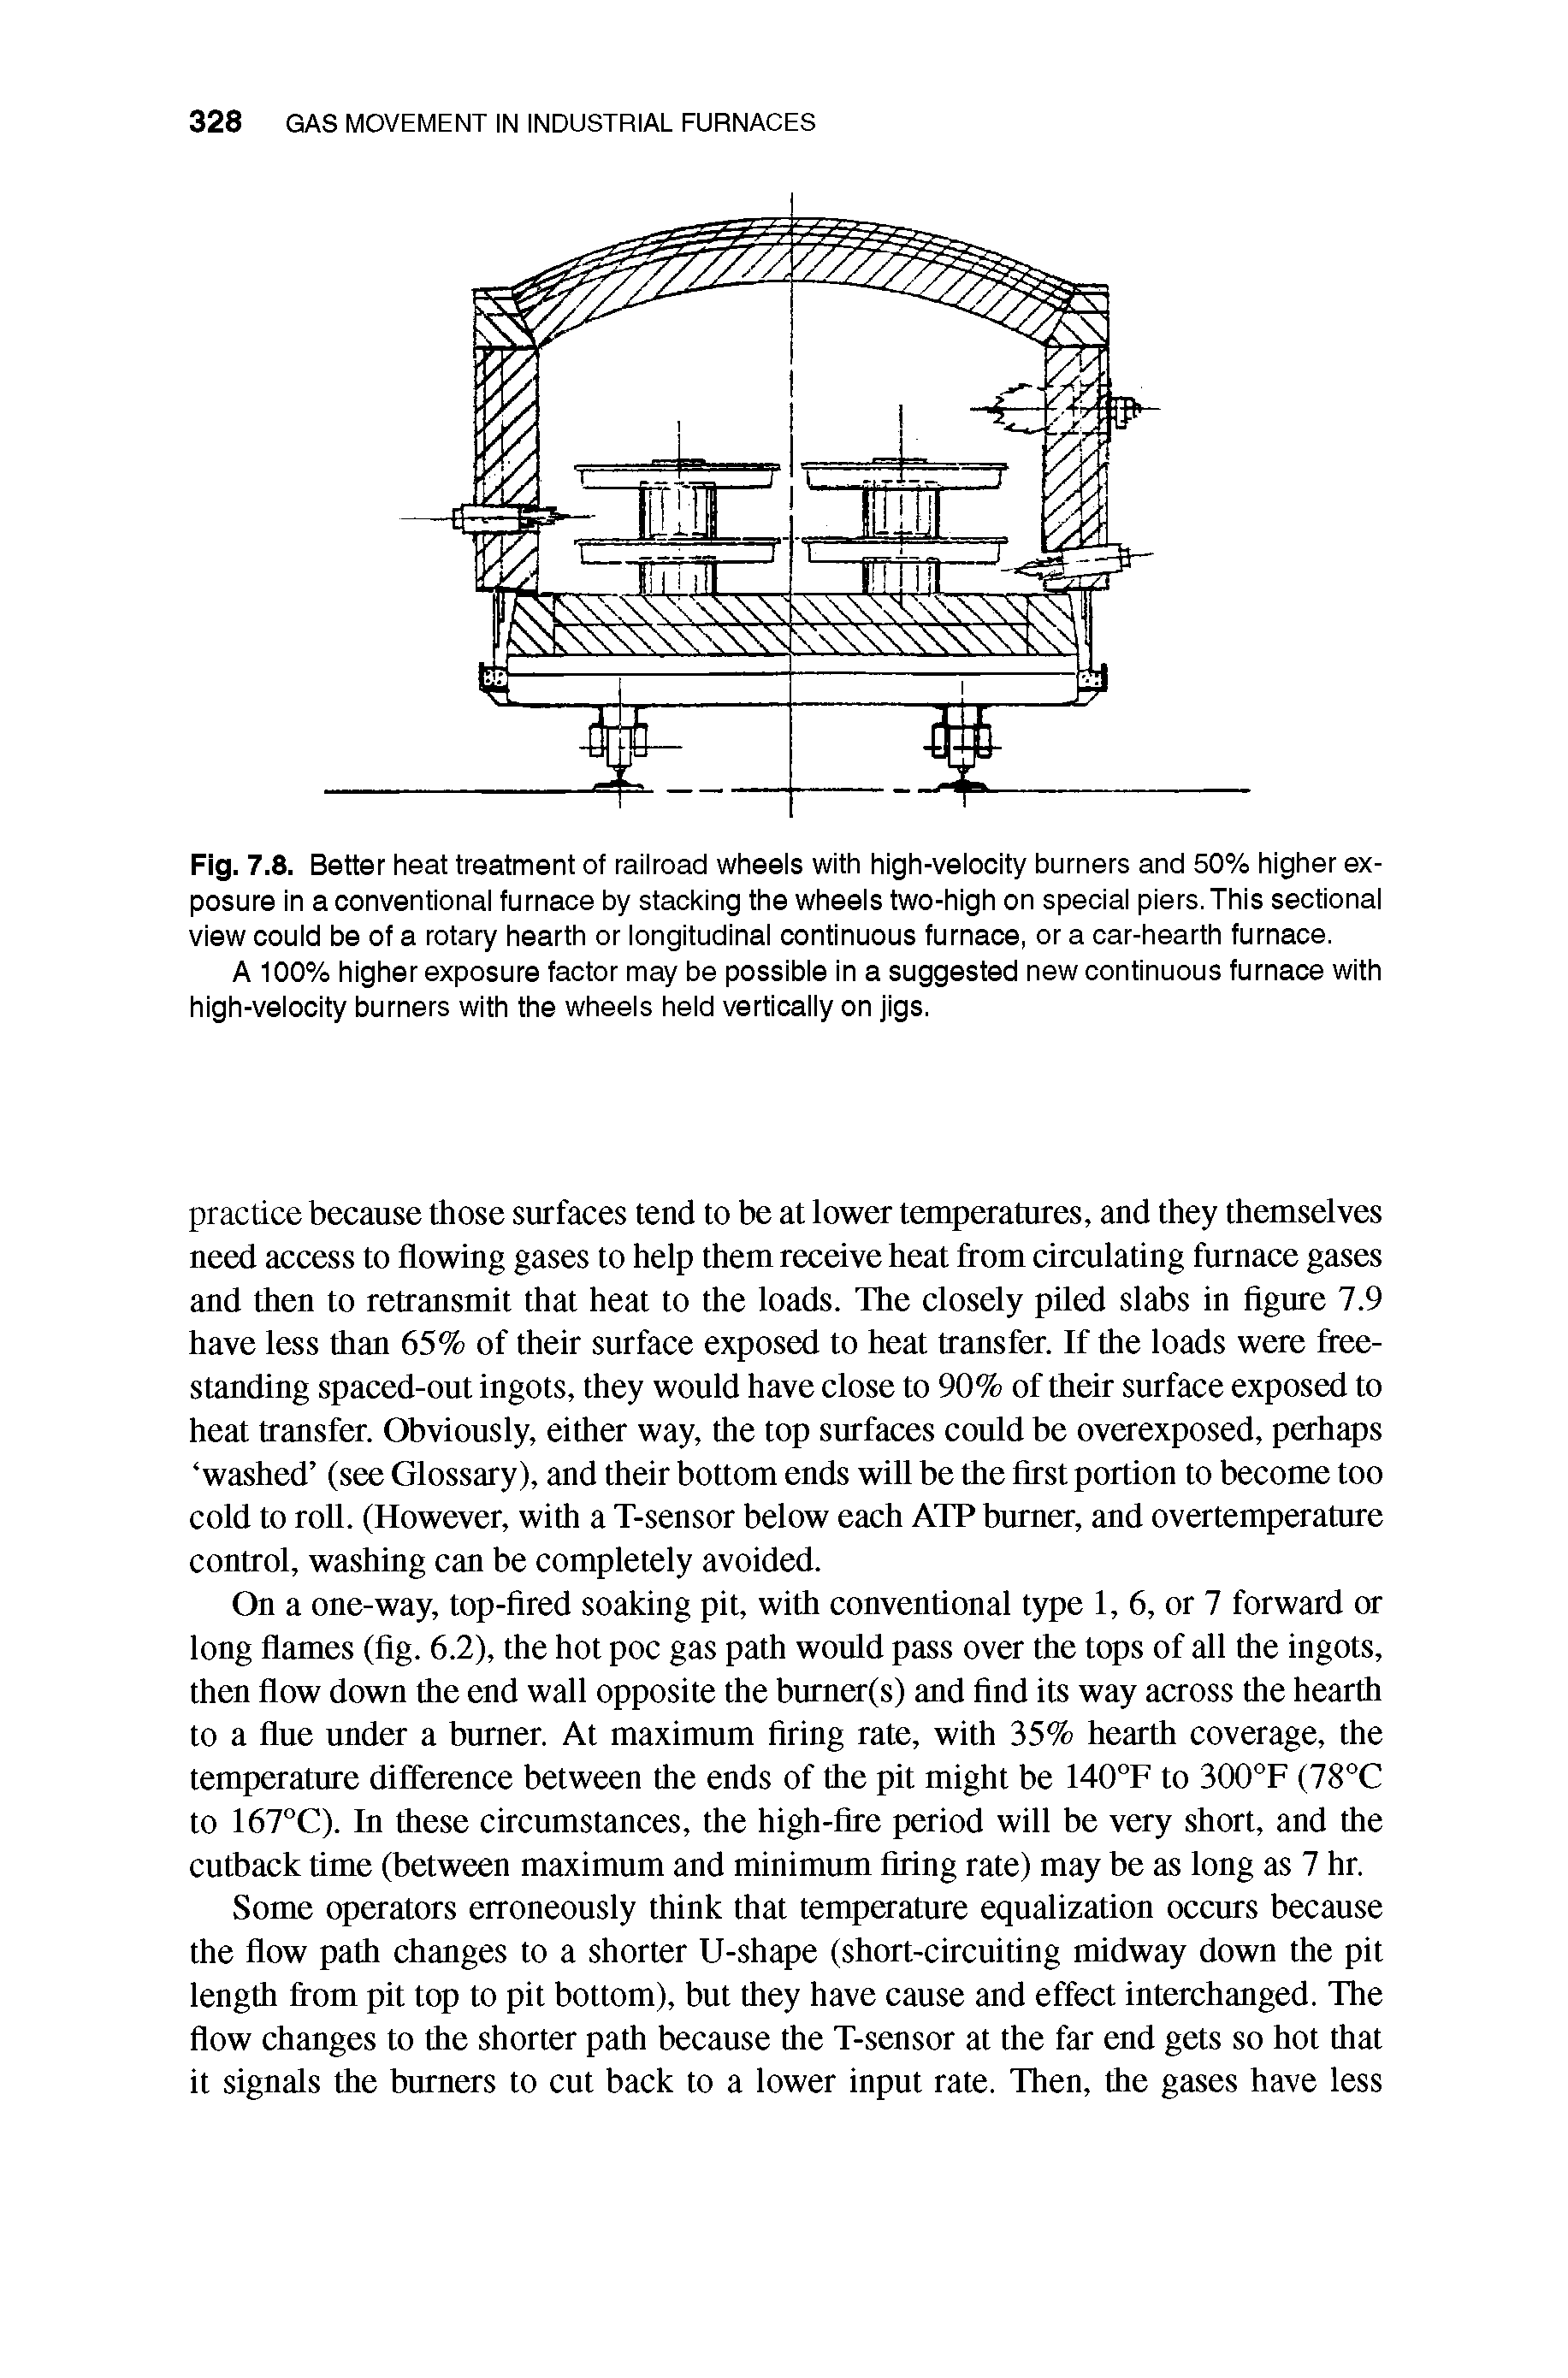 Fig. 7.8. Better heat treatment of railroad wheels with high-velocity burners and 50% higher exposure in a conventional furnace by stacking the wheels two-high on special piers.This sectional view could be of a rotary hearth or longitudinal continuous furnace, or a car-hearth furnace.